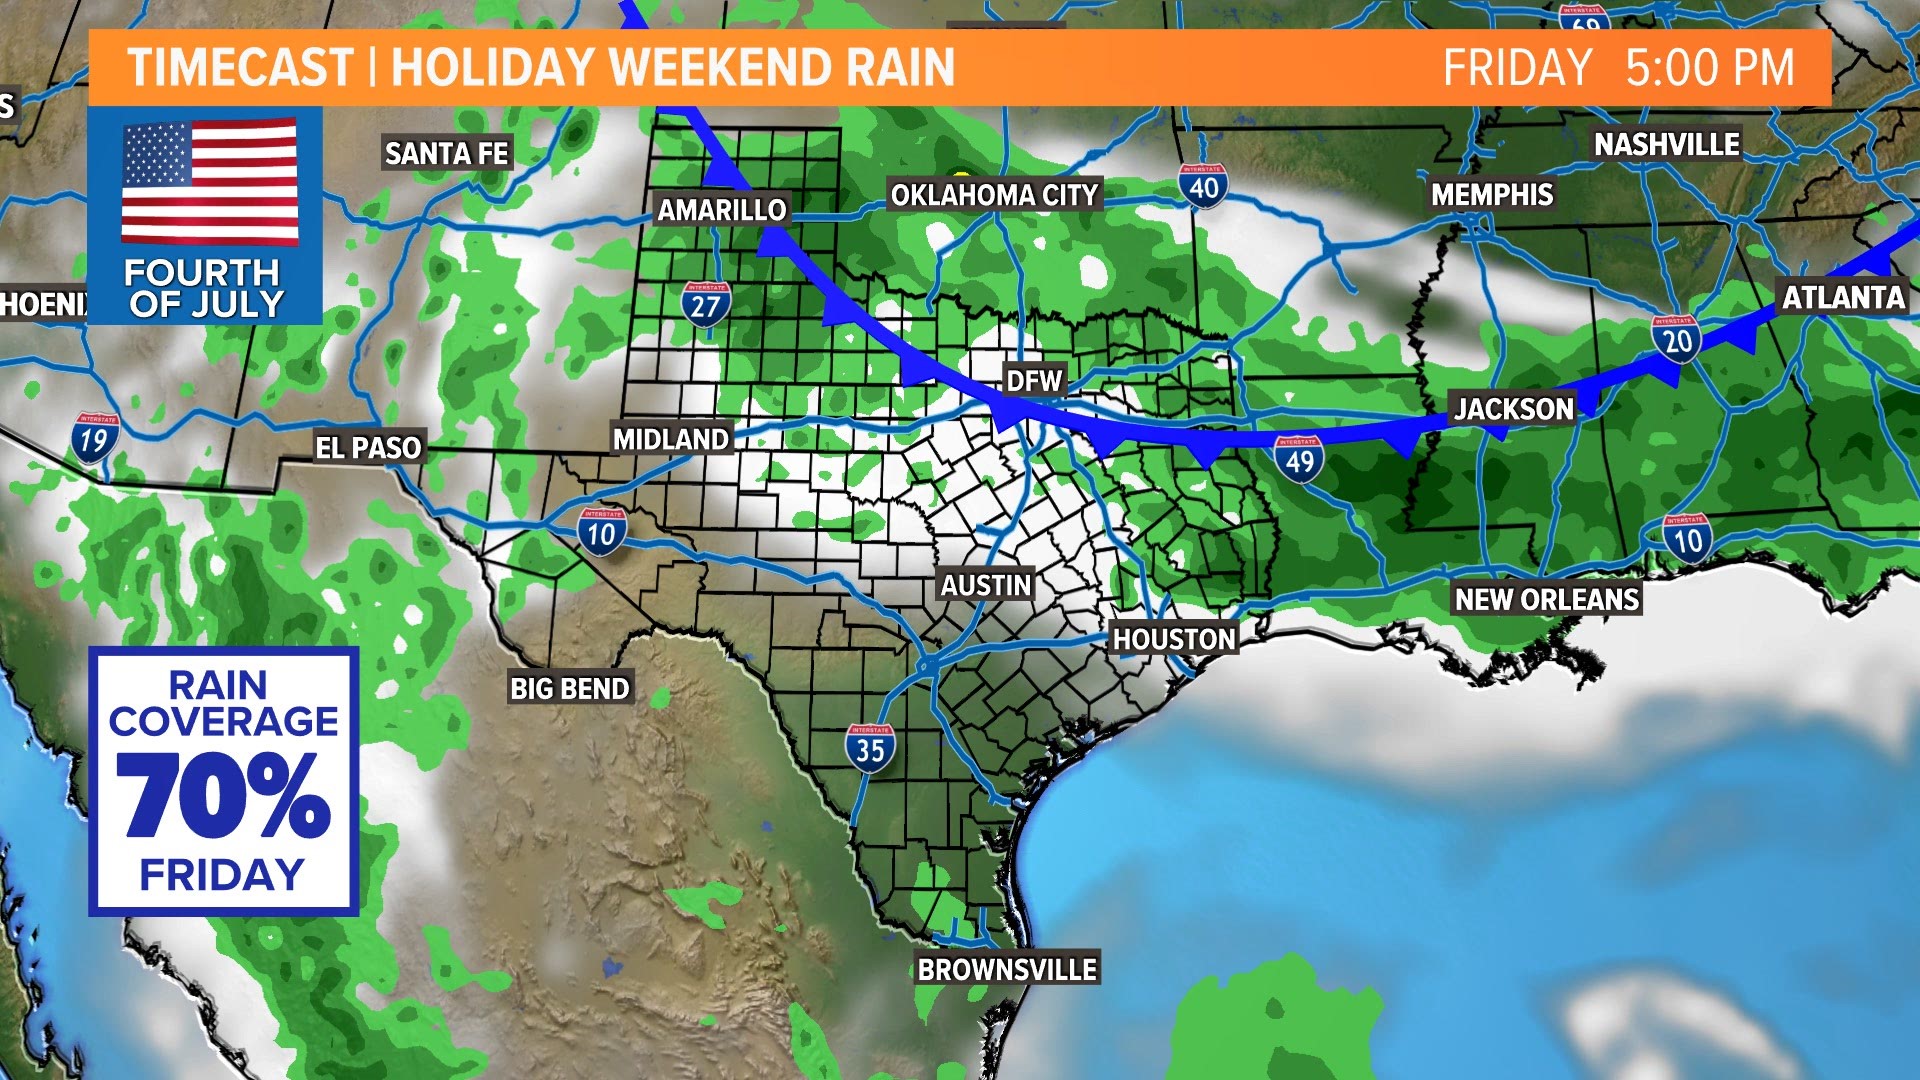 Rain chances increase on Friday and continue through the weekend